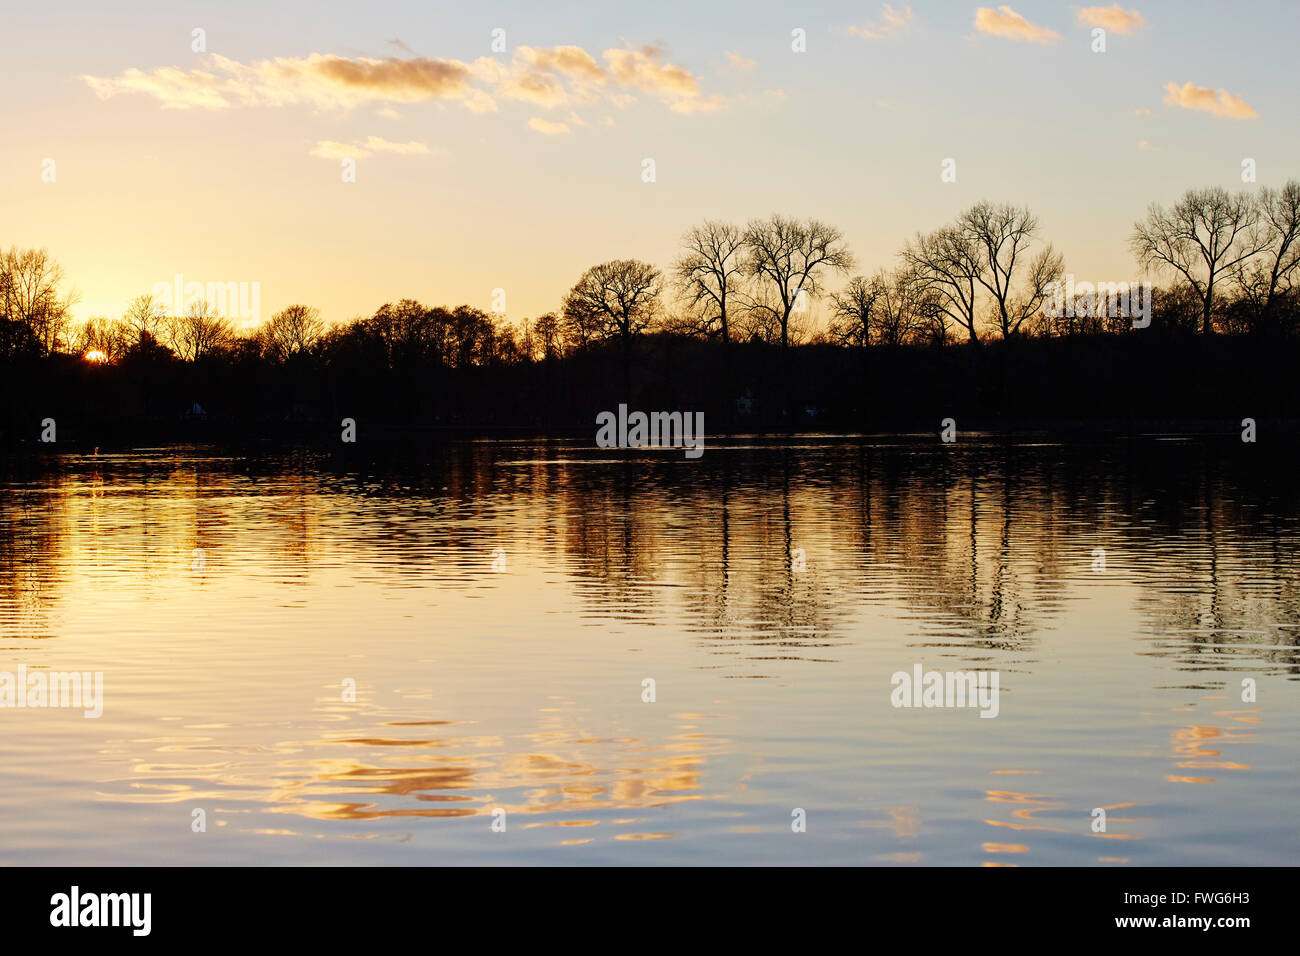 View of trees by the lake in the grounds of Wollaton Hall, Nottingham, England, UK. Stock Photo